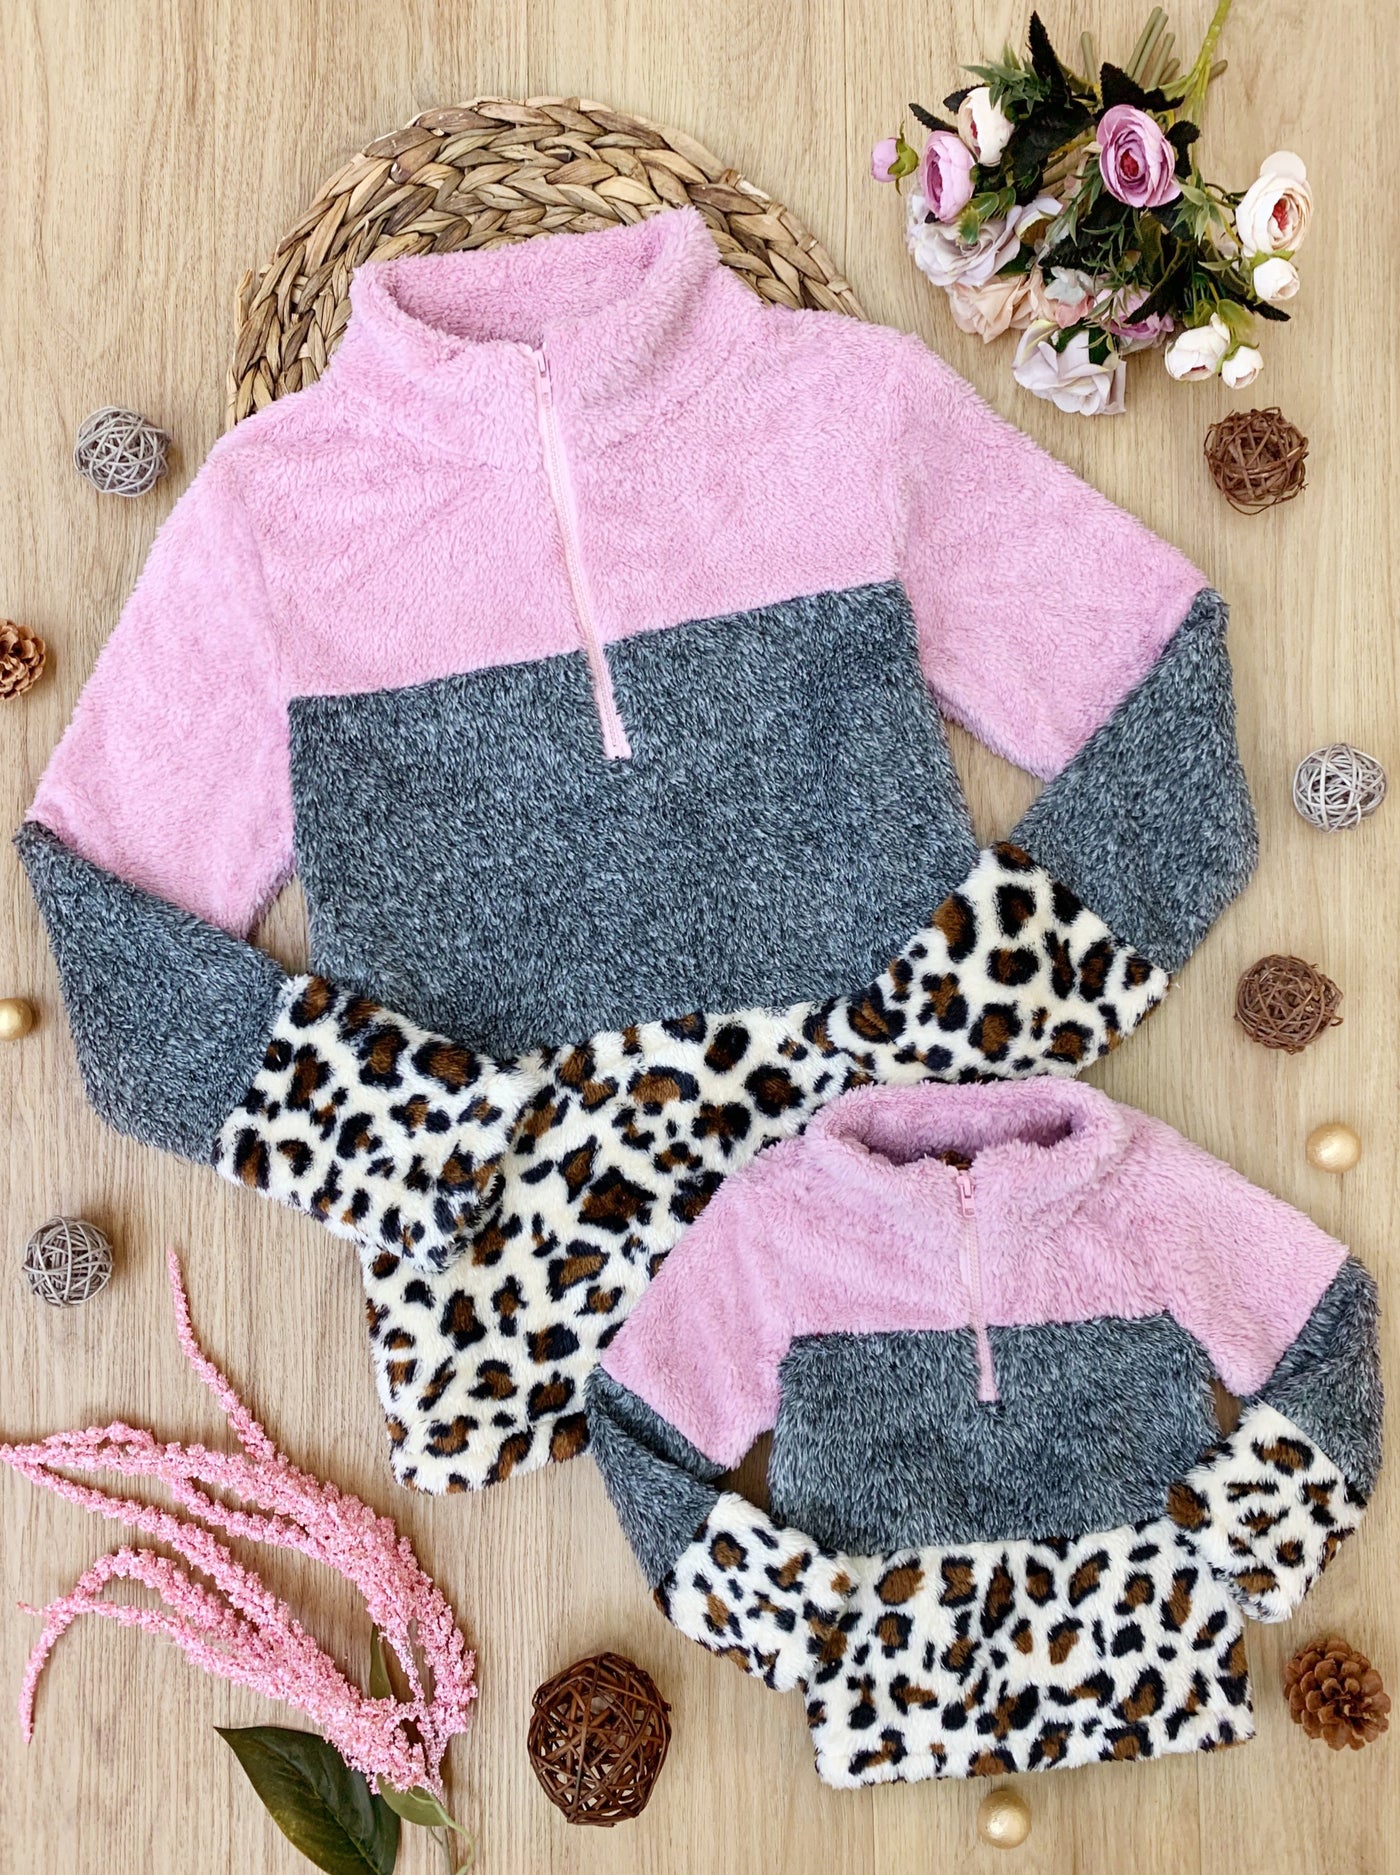 Mommy and Me Matching Sweaters | Leopard Colorblock Fleece Pullovers